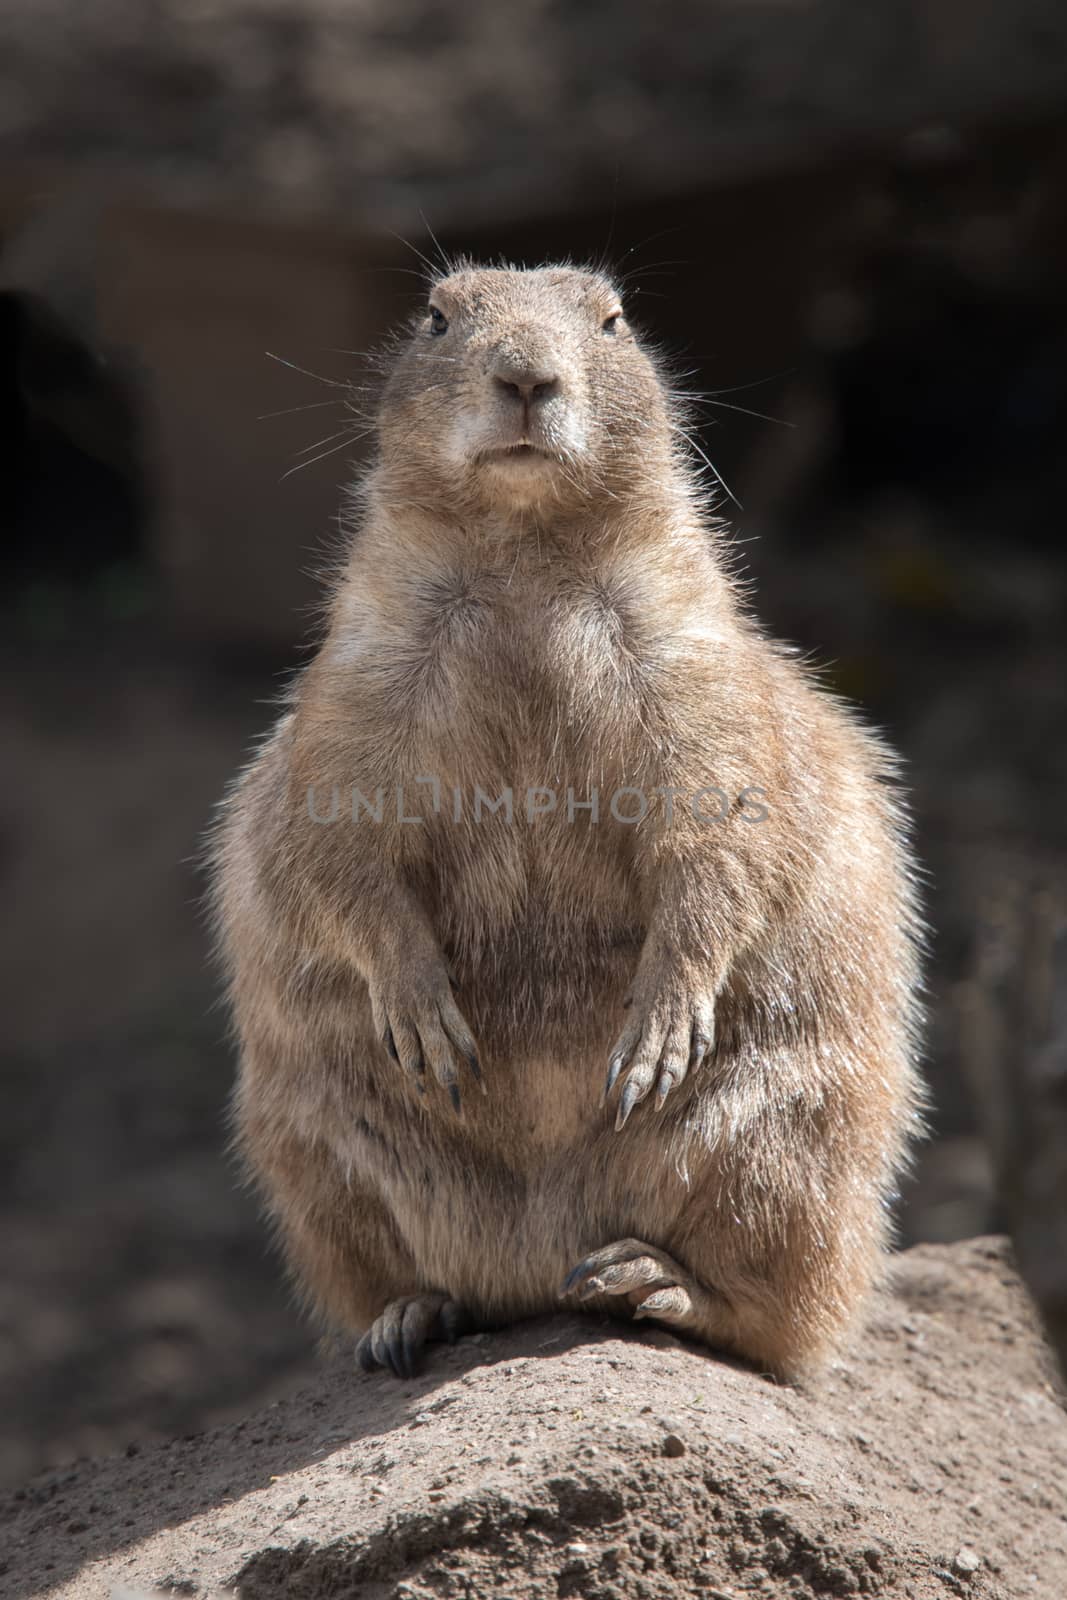 Black tailed prairie dog by alan_tunnicliffe